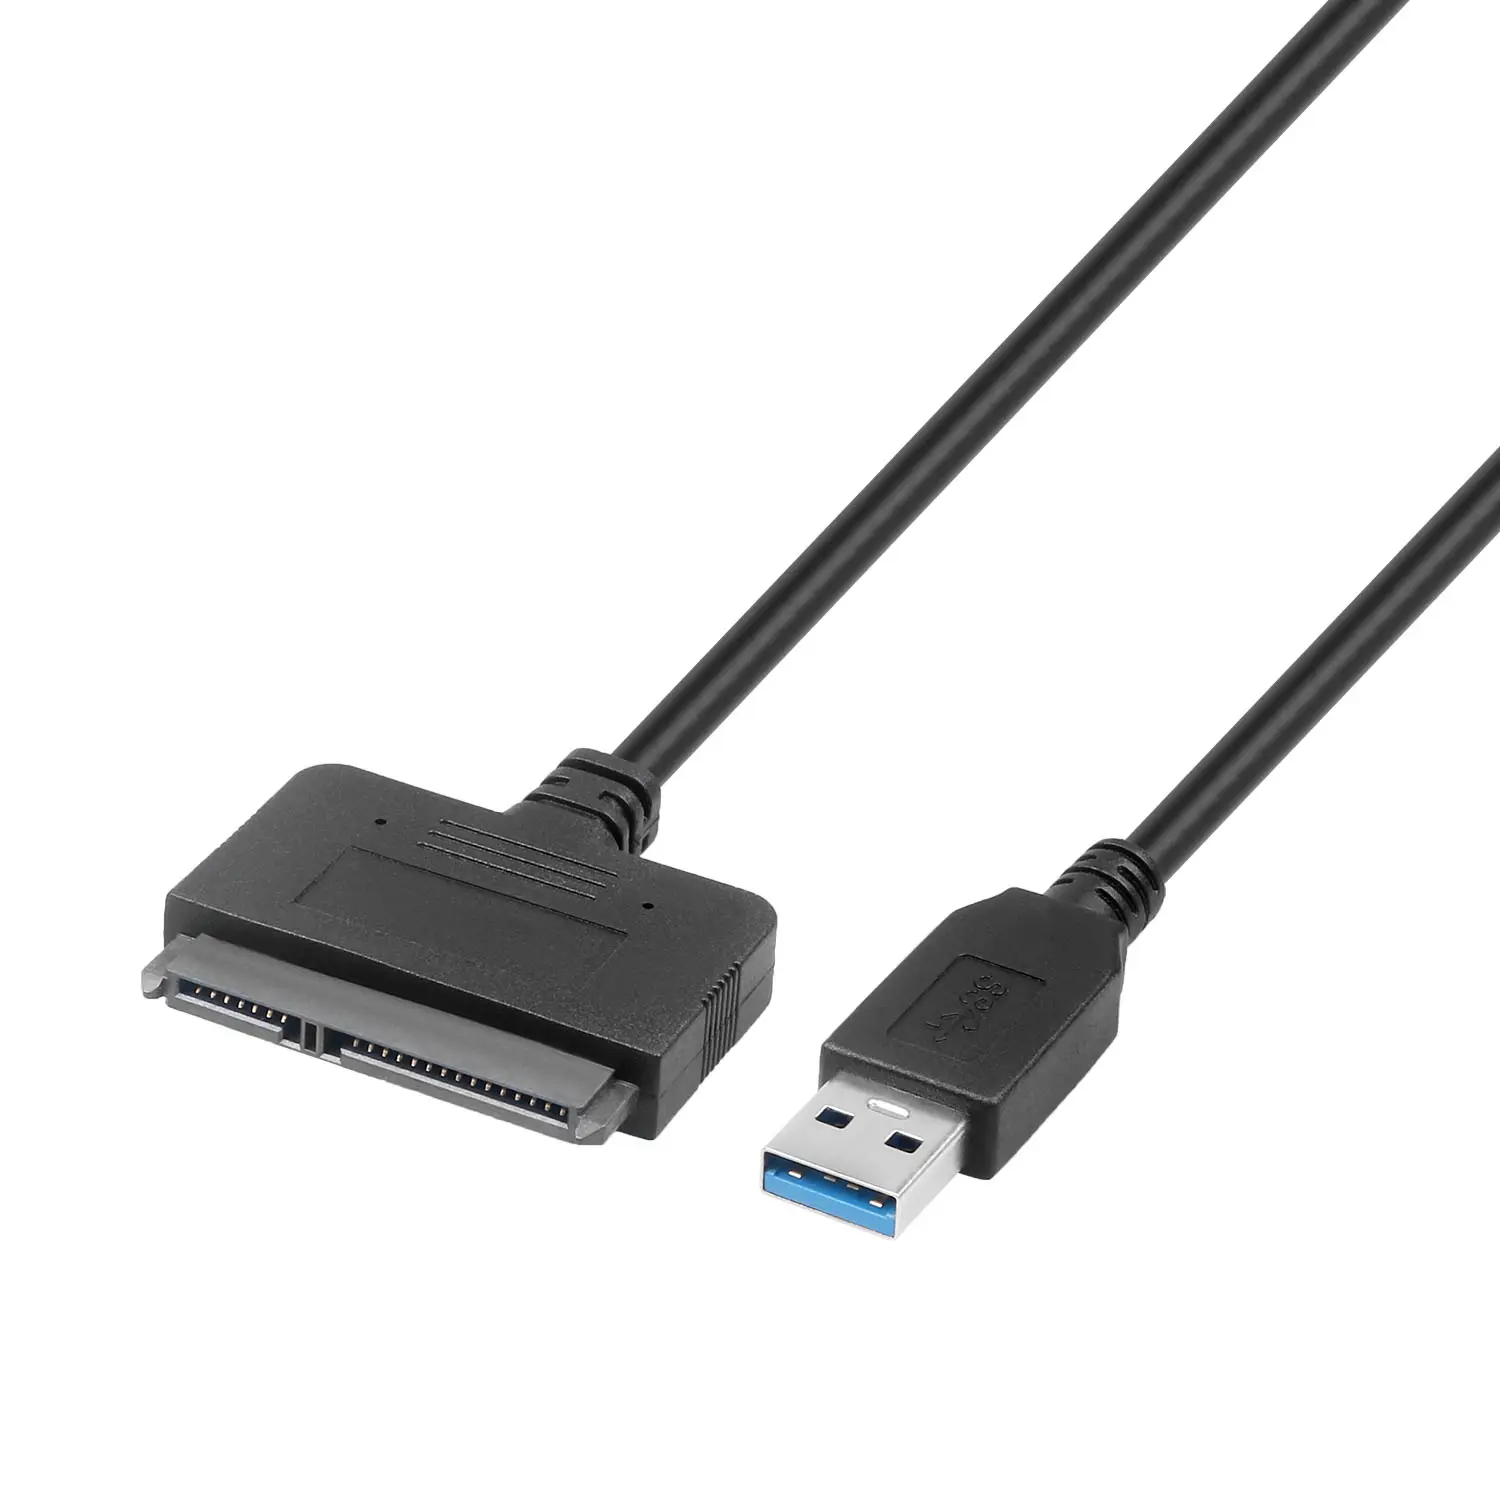 USB 3.0 To SATA 22Pin External Converter Cable for 2.5" SATA Drives External Hard Drive Adapter usb 3.0 to sata 3 cable